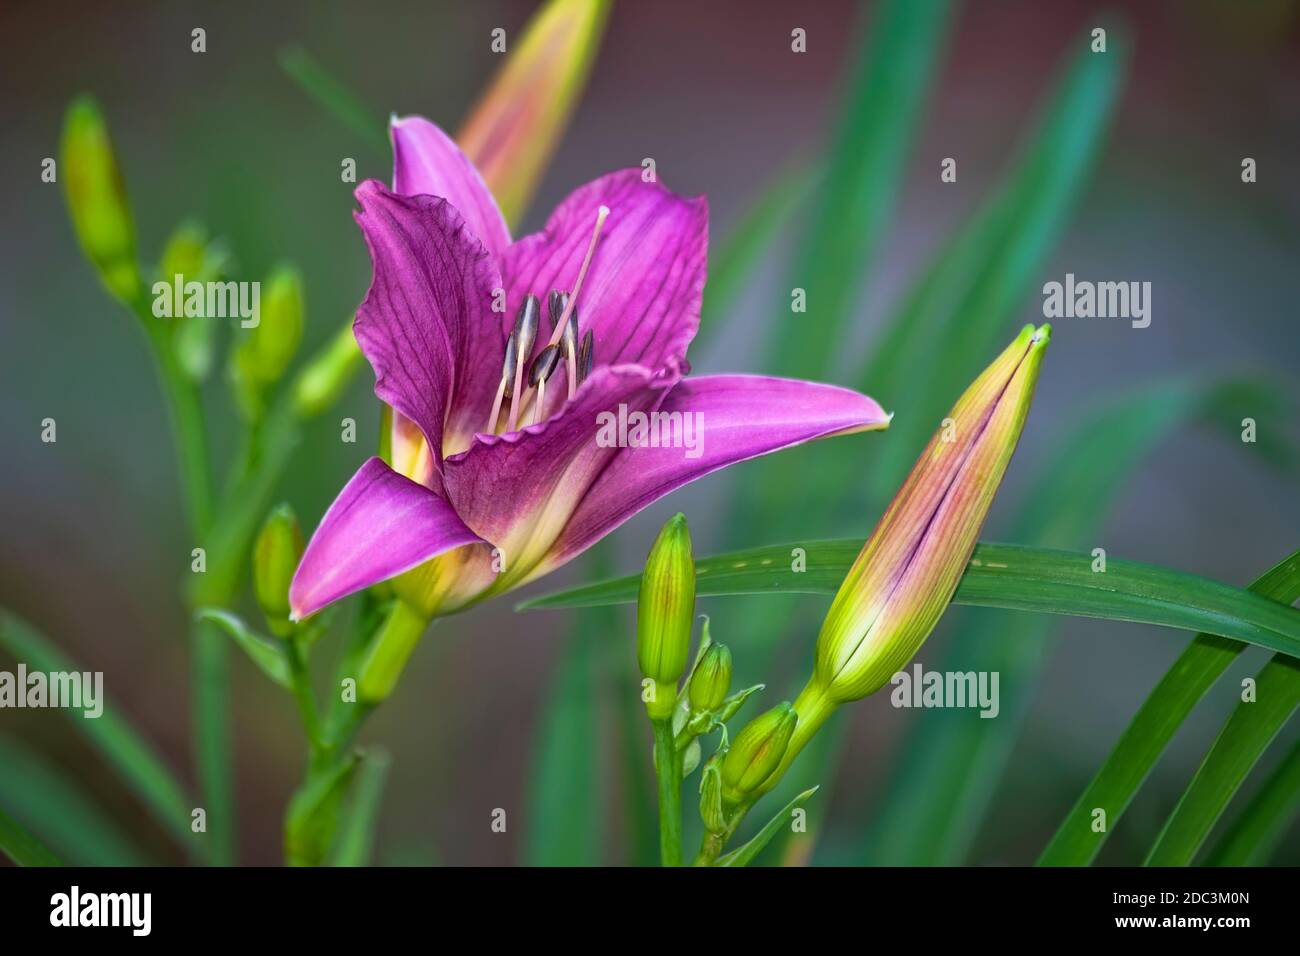 Vibrant Pink Day Lily plant on a soft background Stock Photo